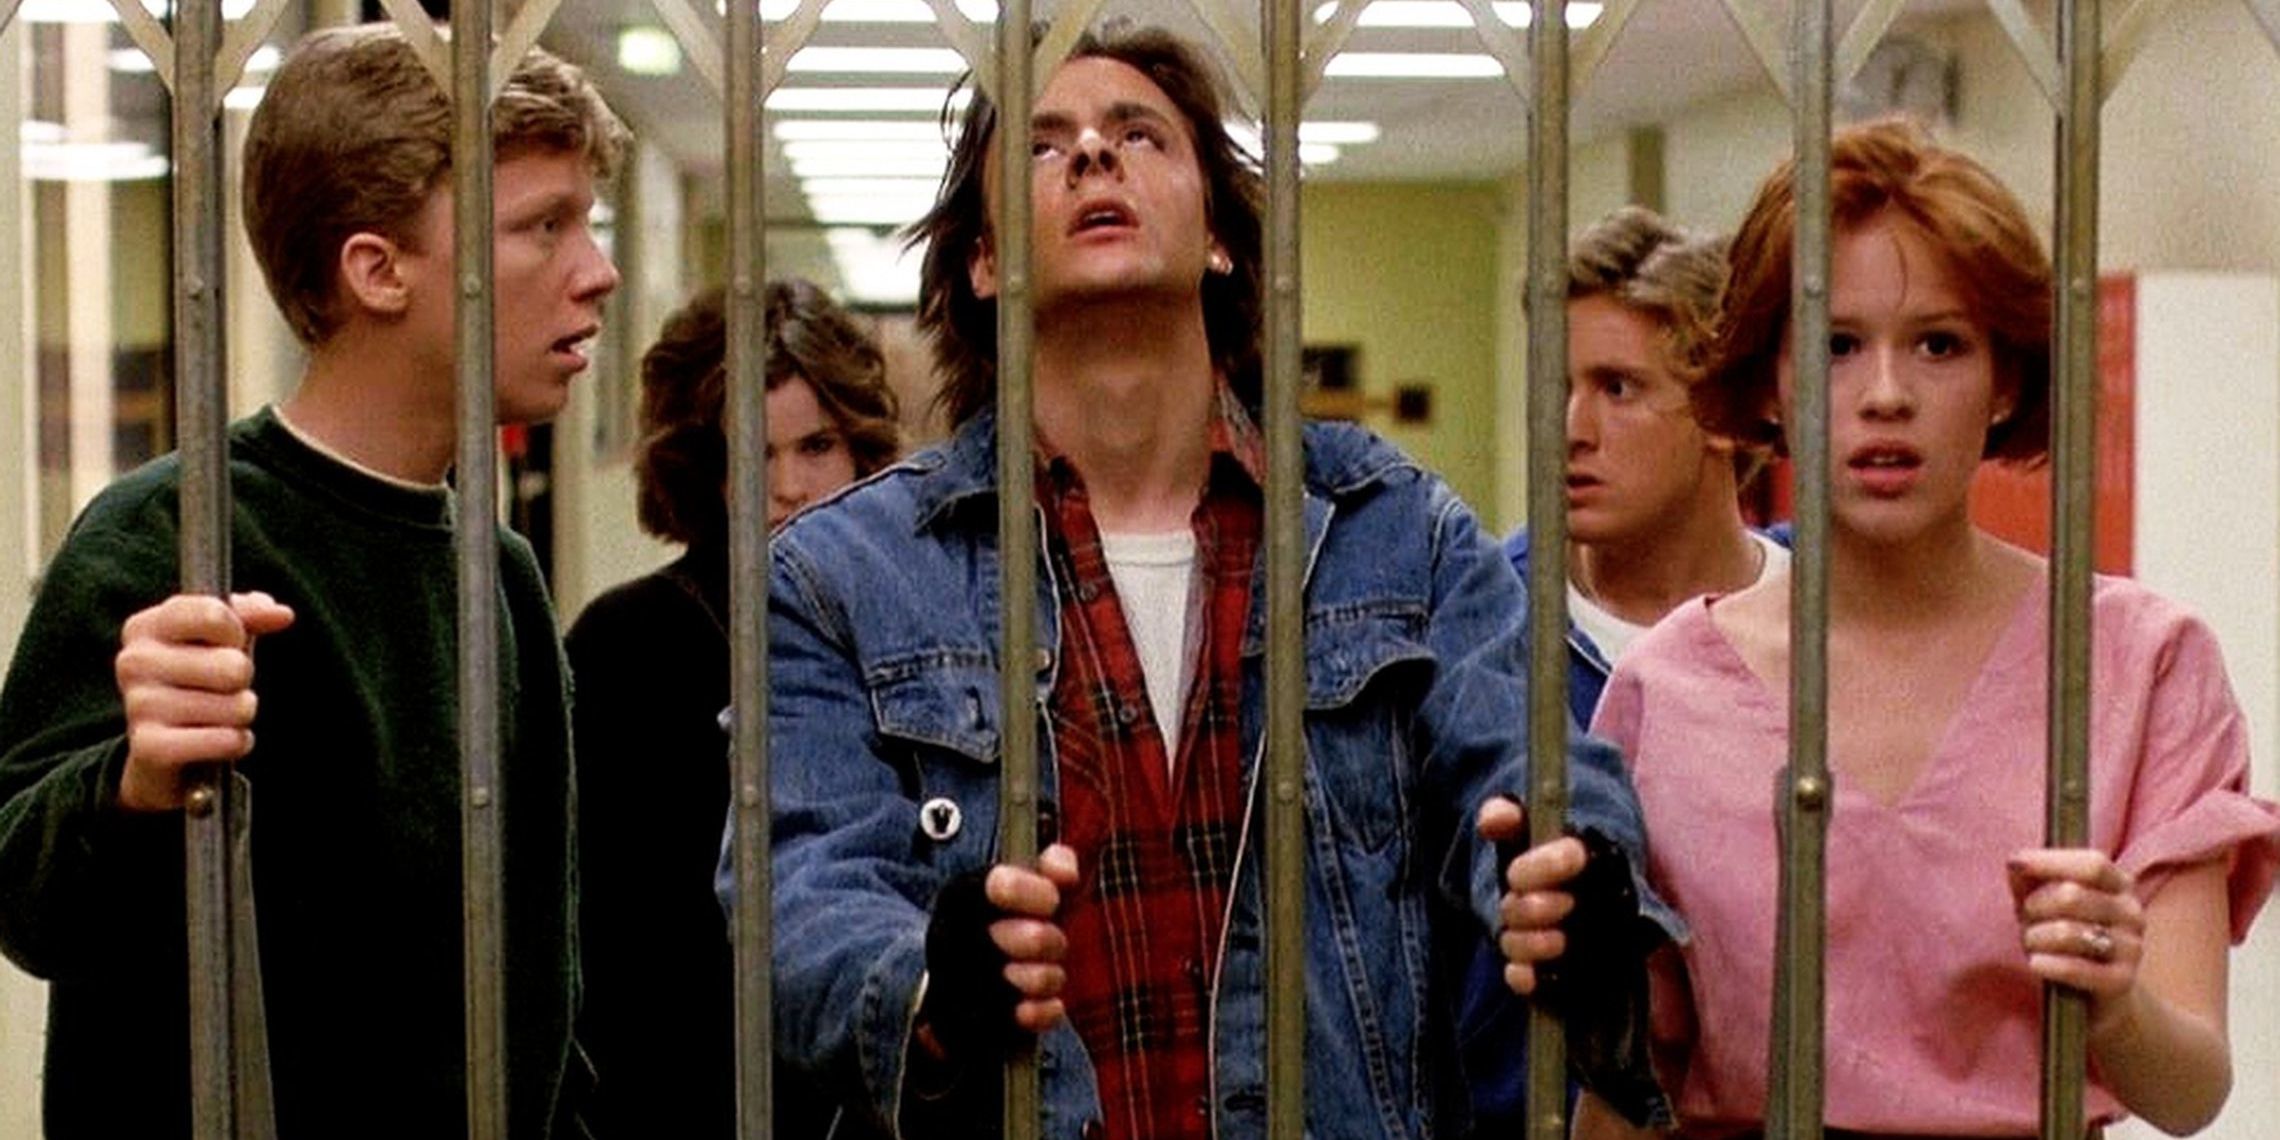 The group of teens in The Breakfast Club stand behind bars looking distraught.